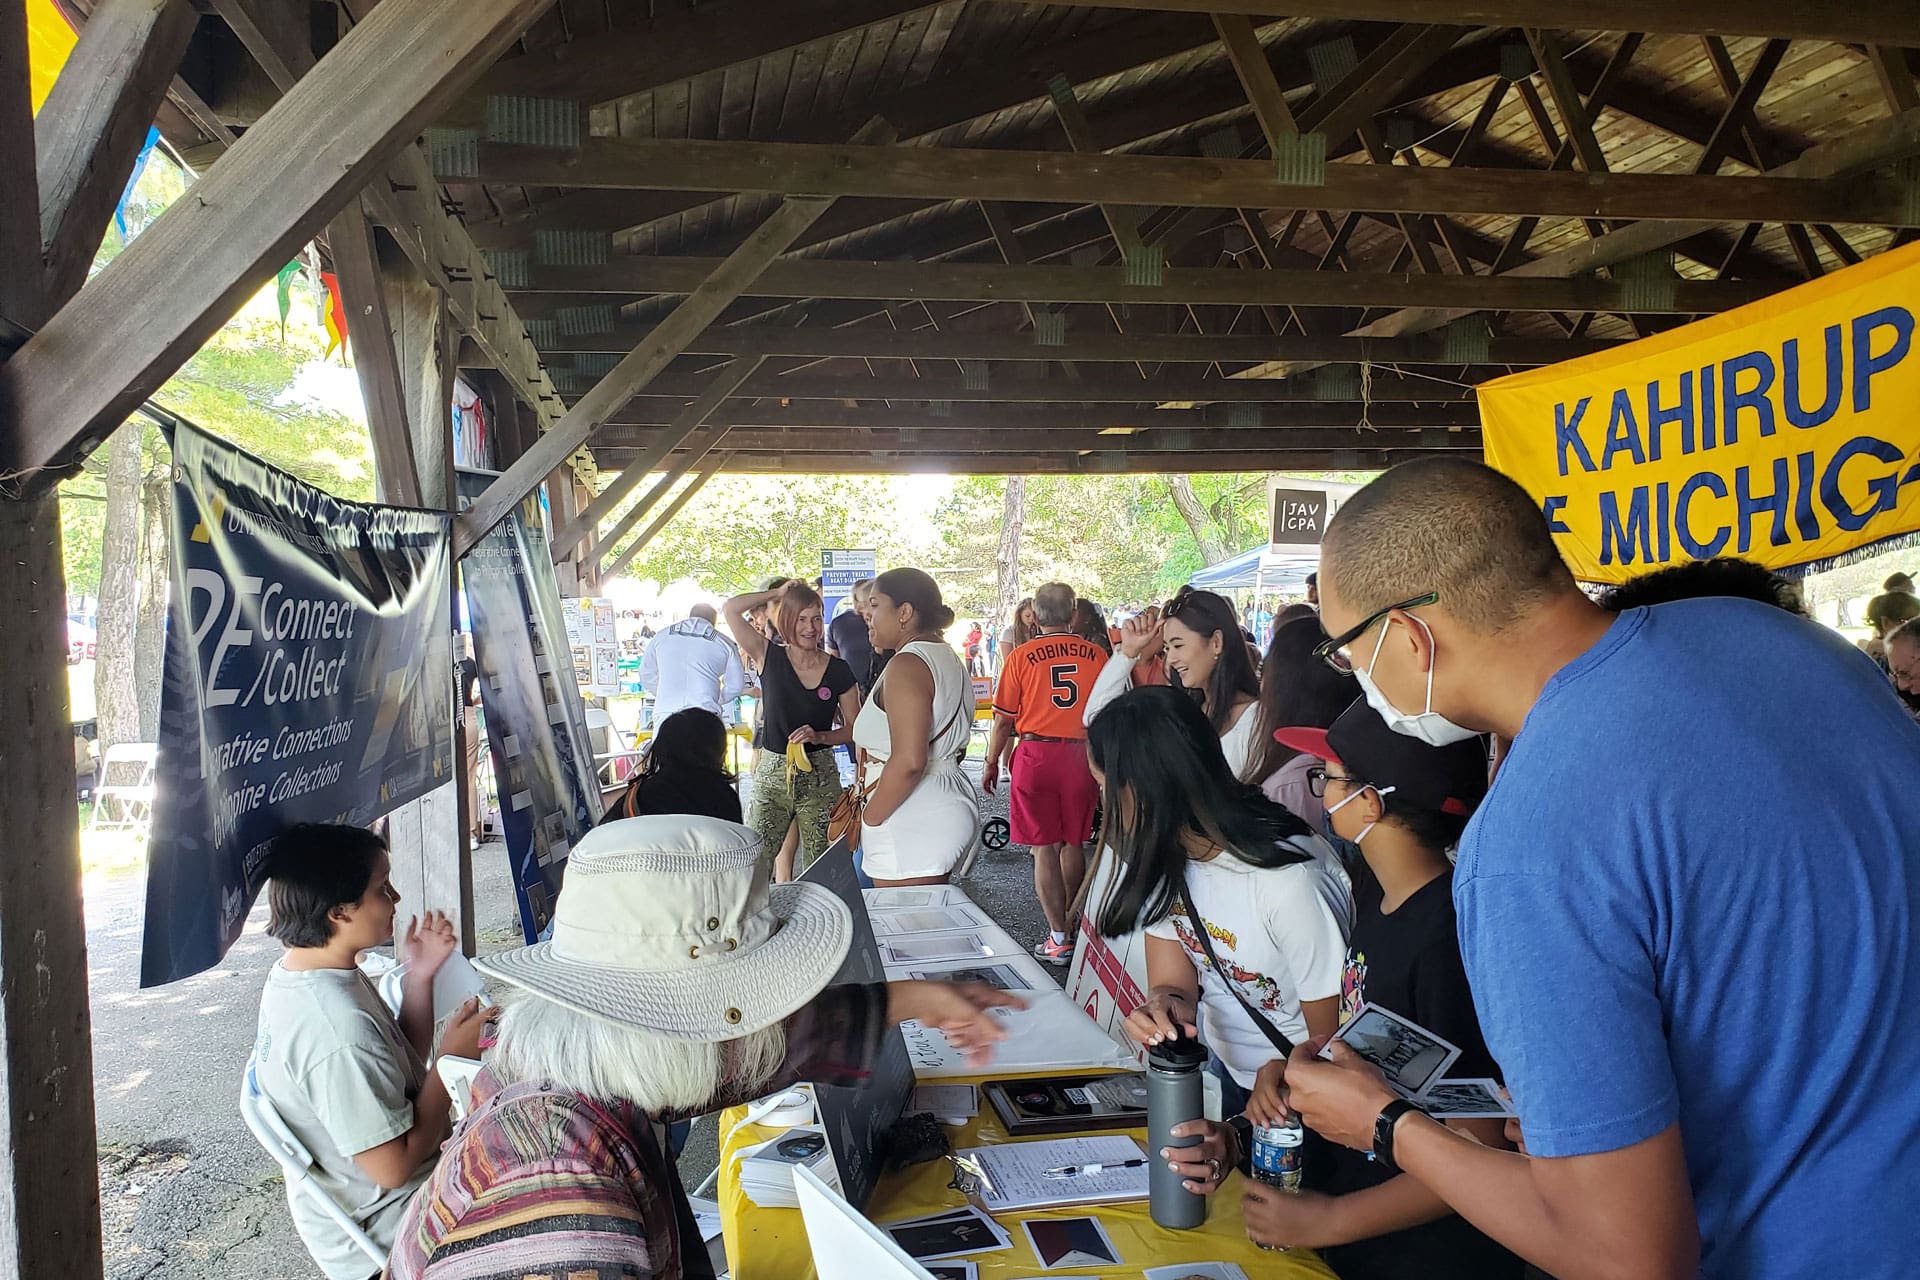 A crowd of people around an information table at a picnic.